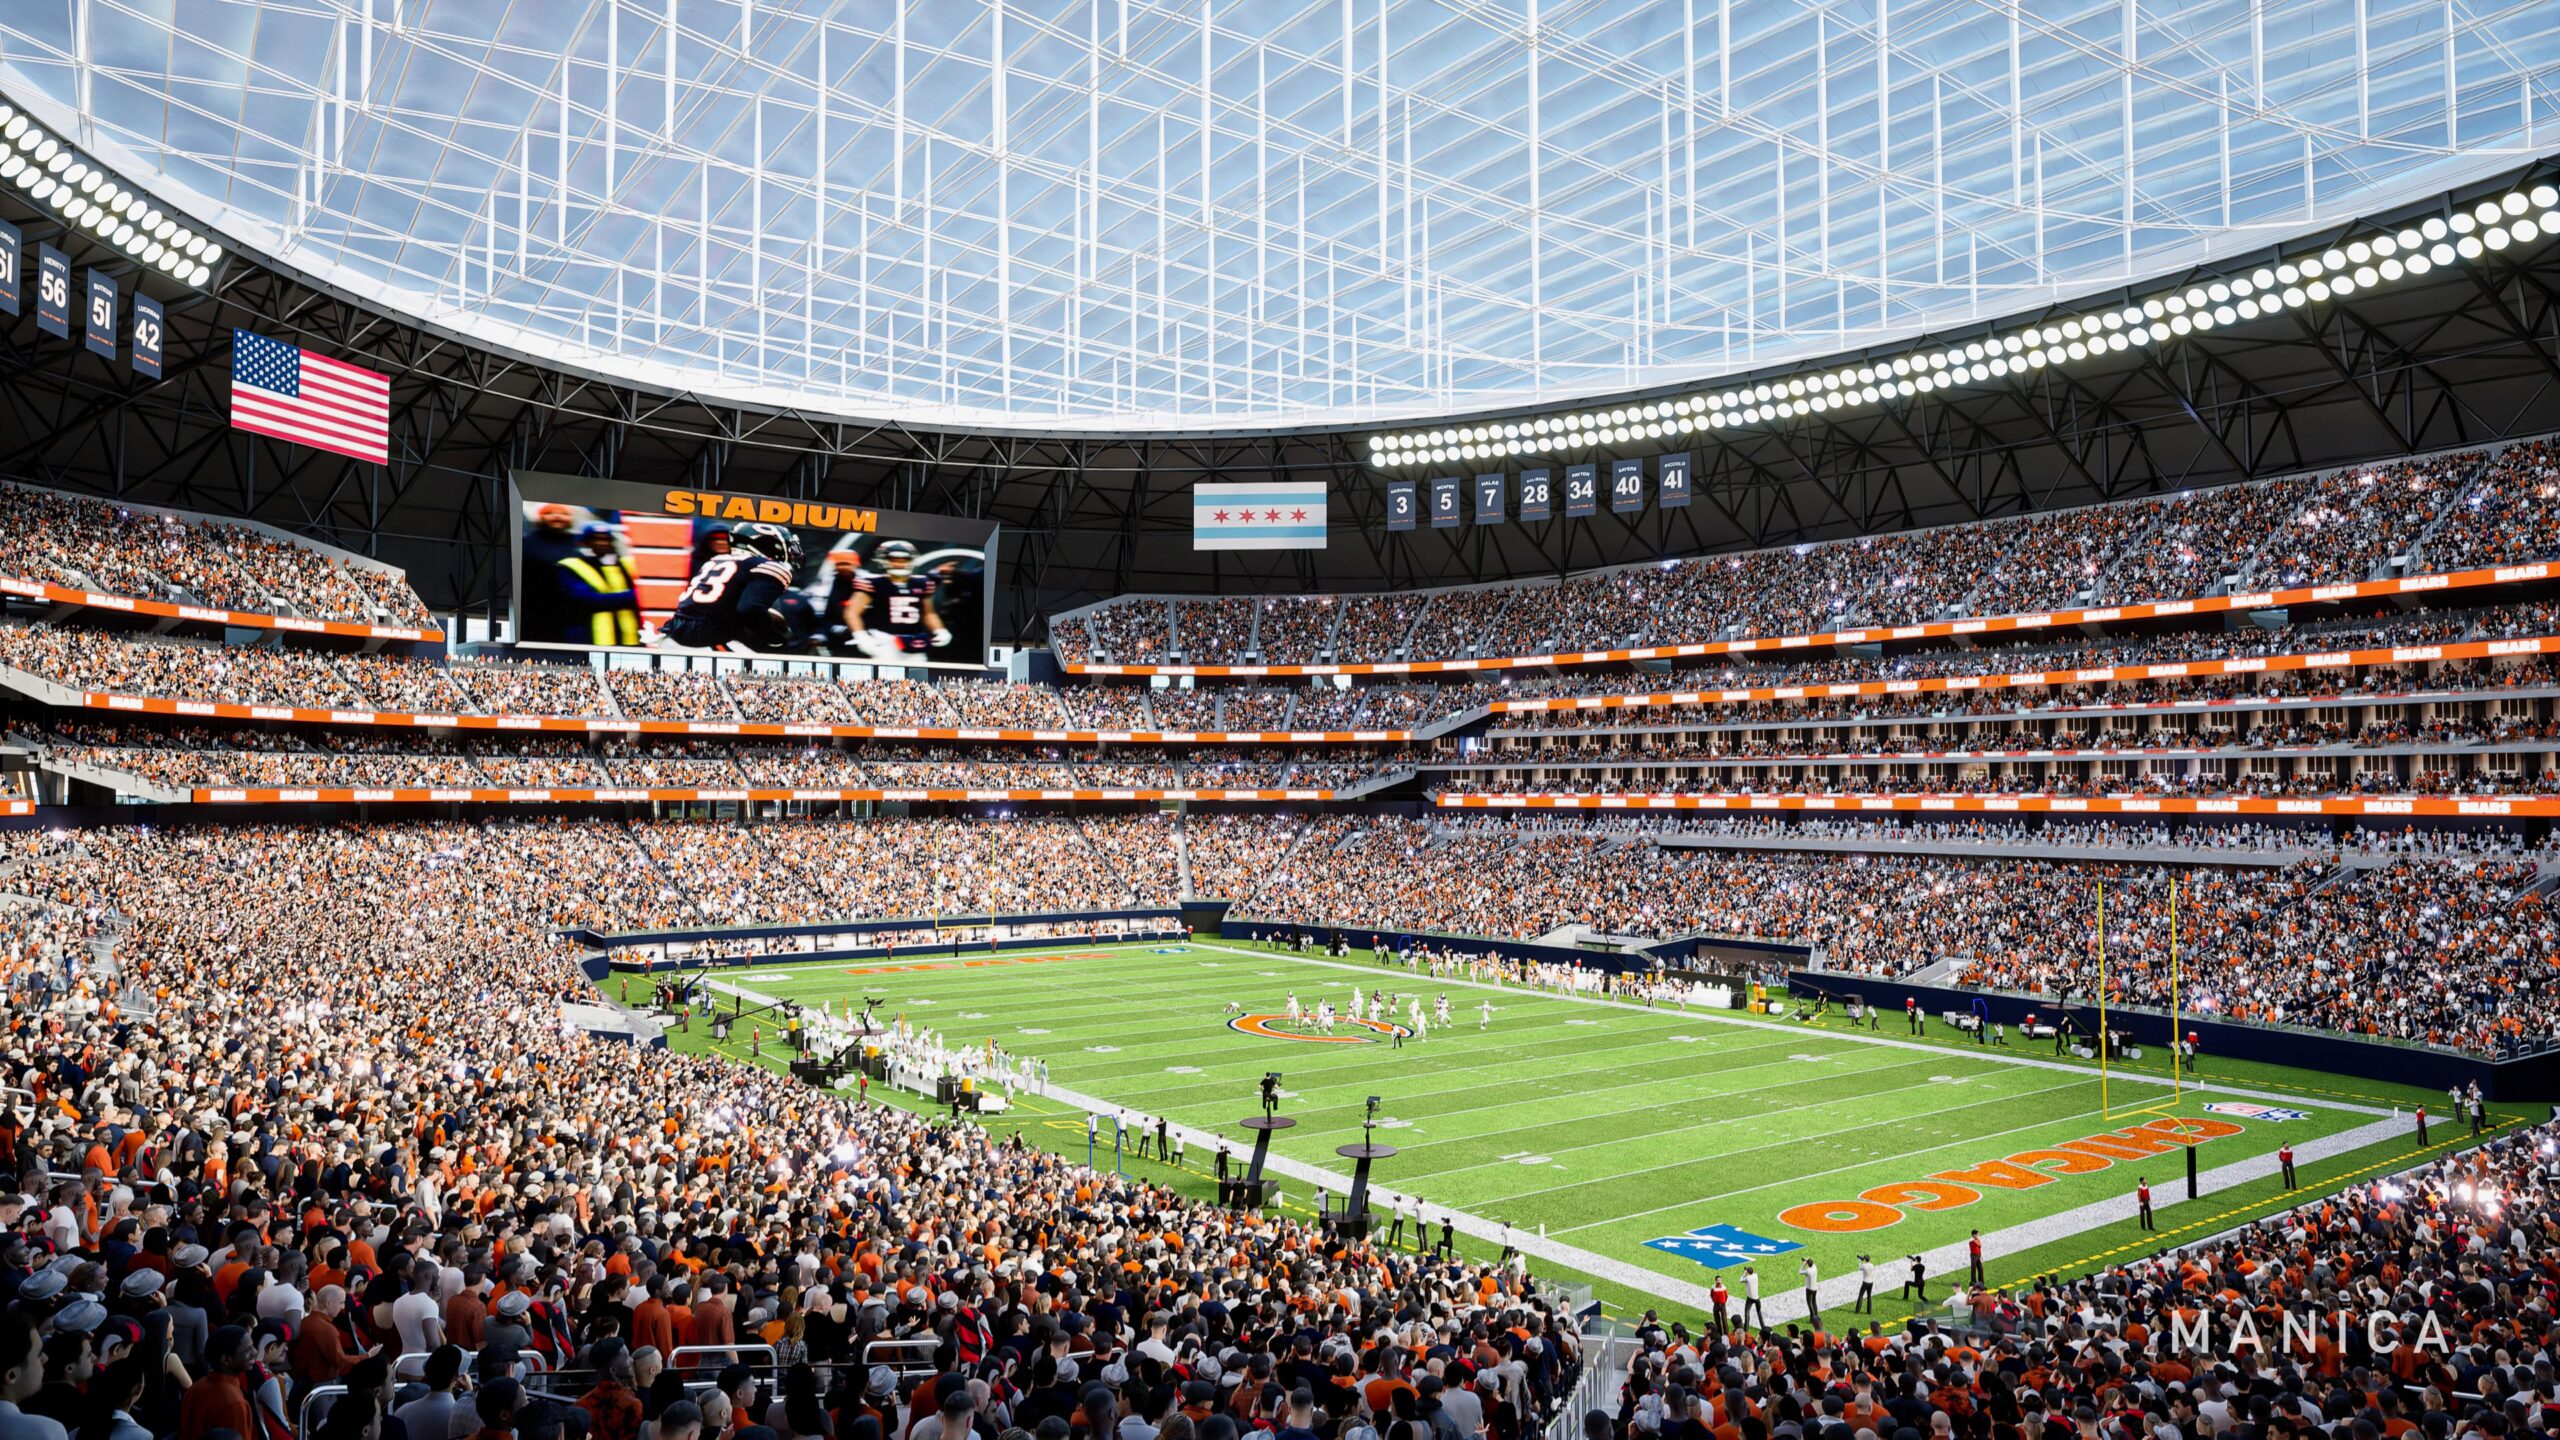 Renderings of a new state-of-the-art enclosed stadium with open space...